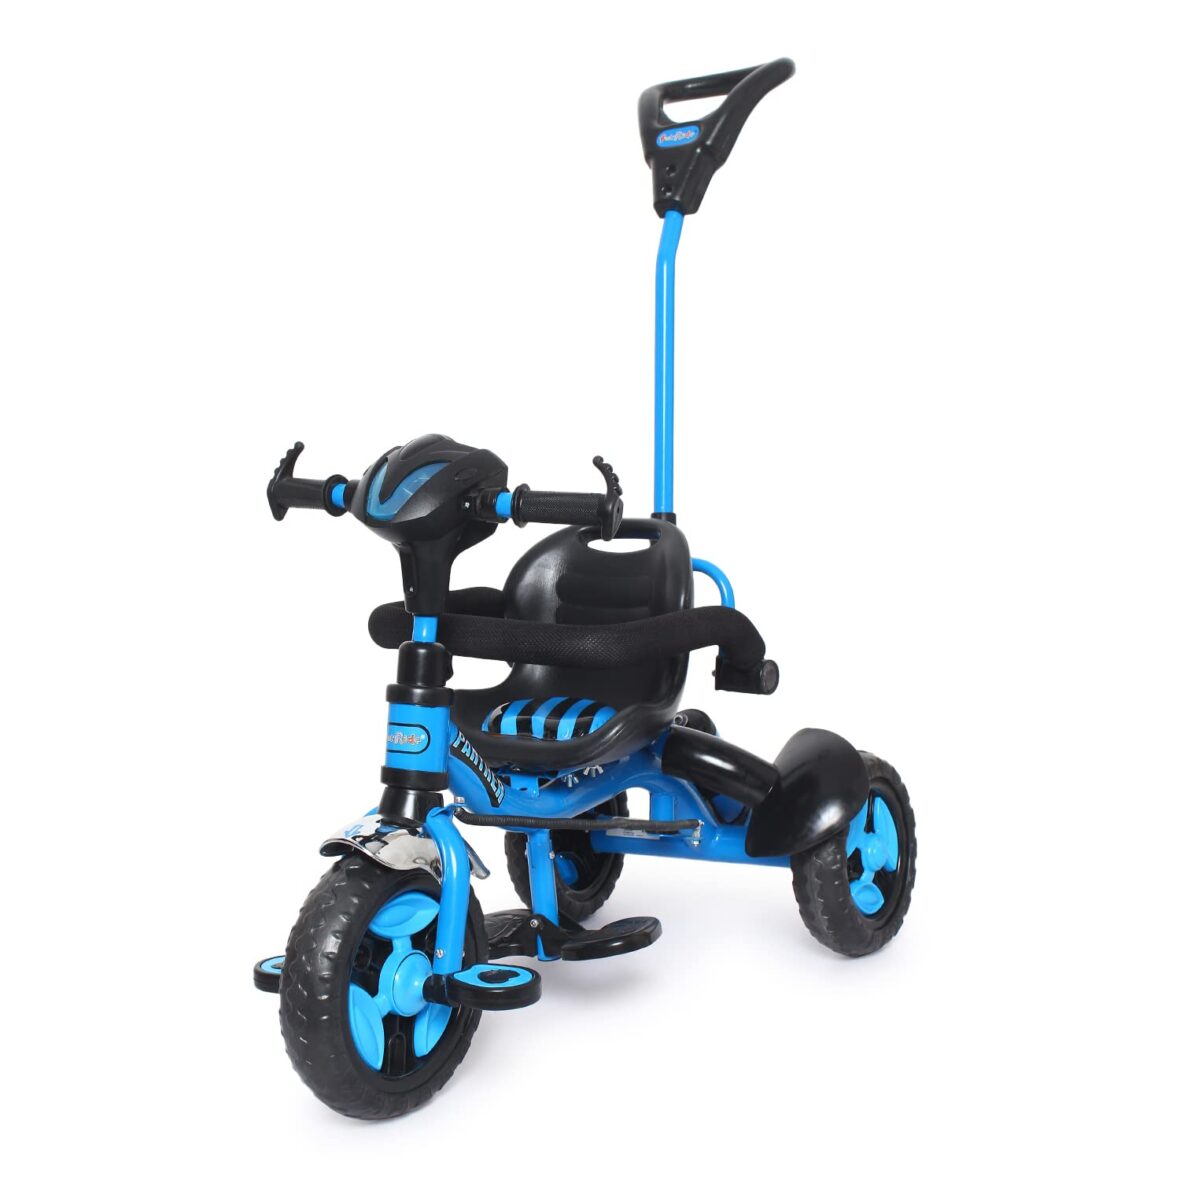 FunRide Kids Tricycle Rider Panther with Removable Parental Control Handle (10)